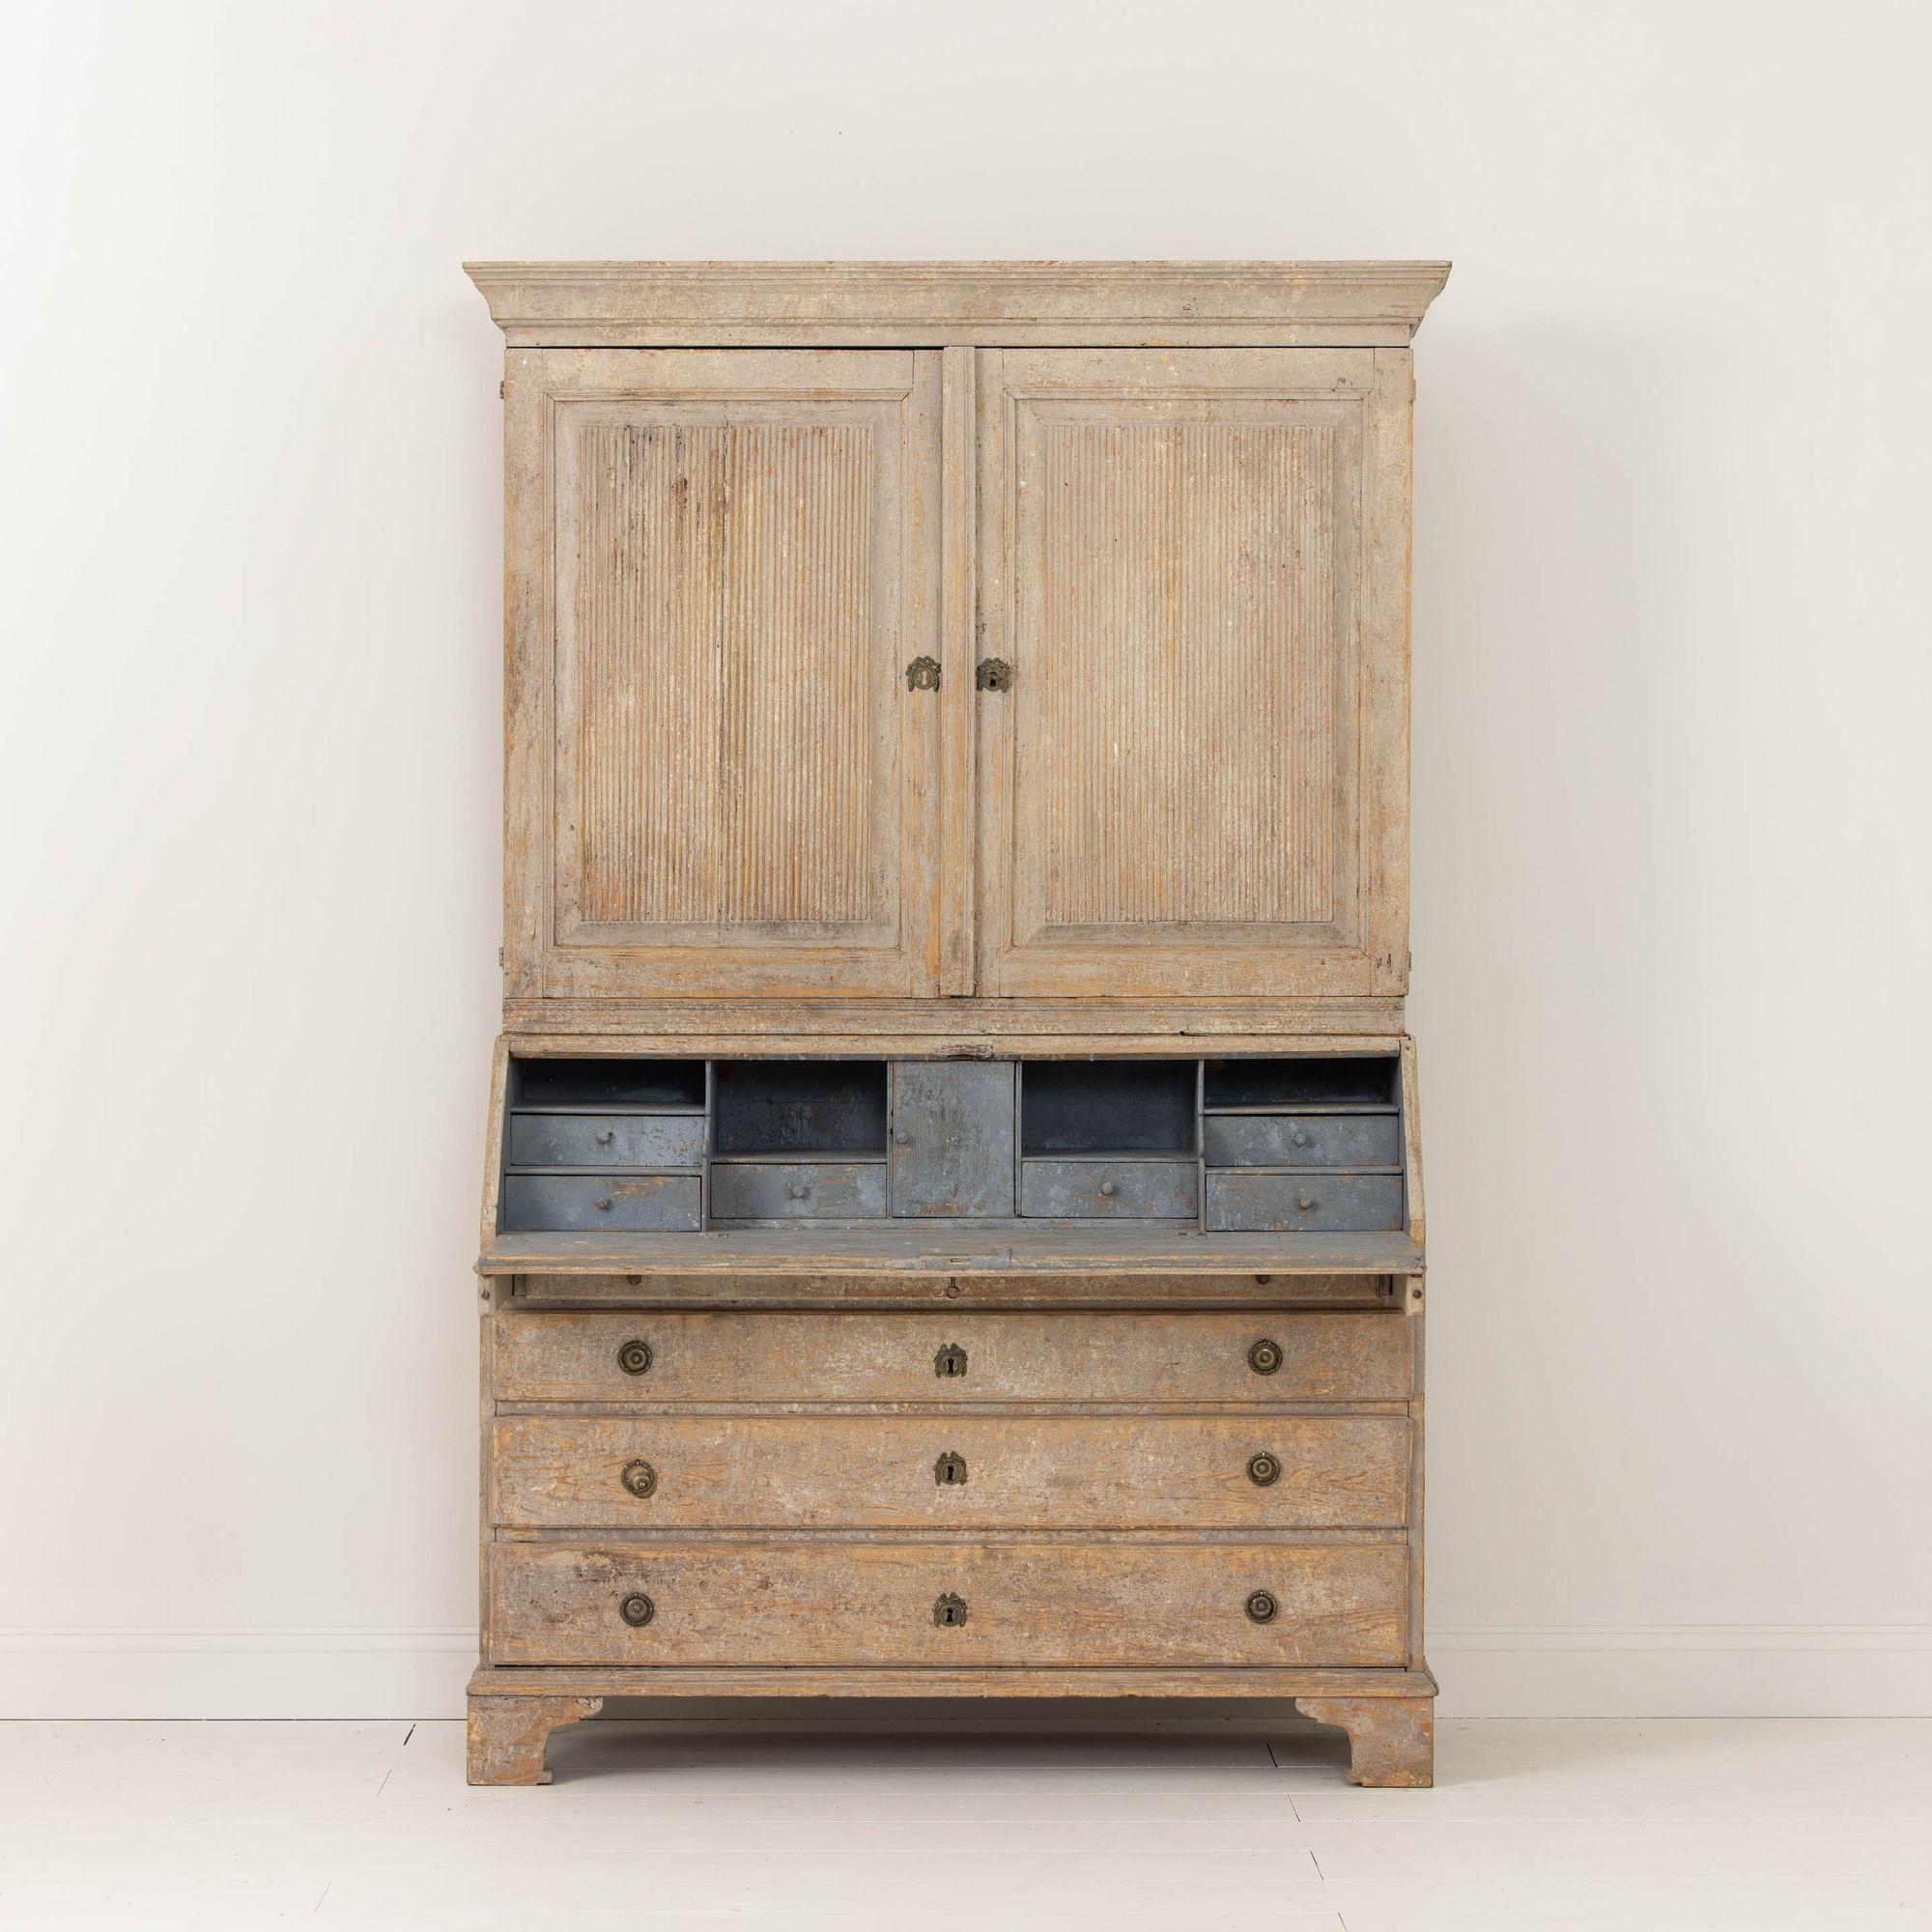 A special Swedish Gustavian period painted secretary with library, circa 1810. The upper section has two shelves, behind large reeded doors. The lower section has a slant front with three graduated drawers on either side of a center door all behind